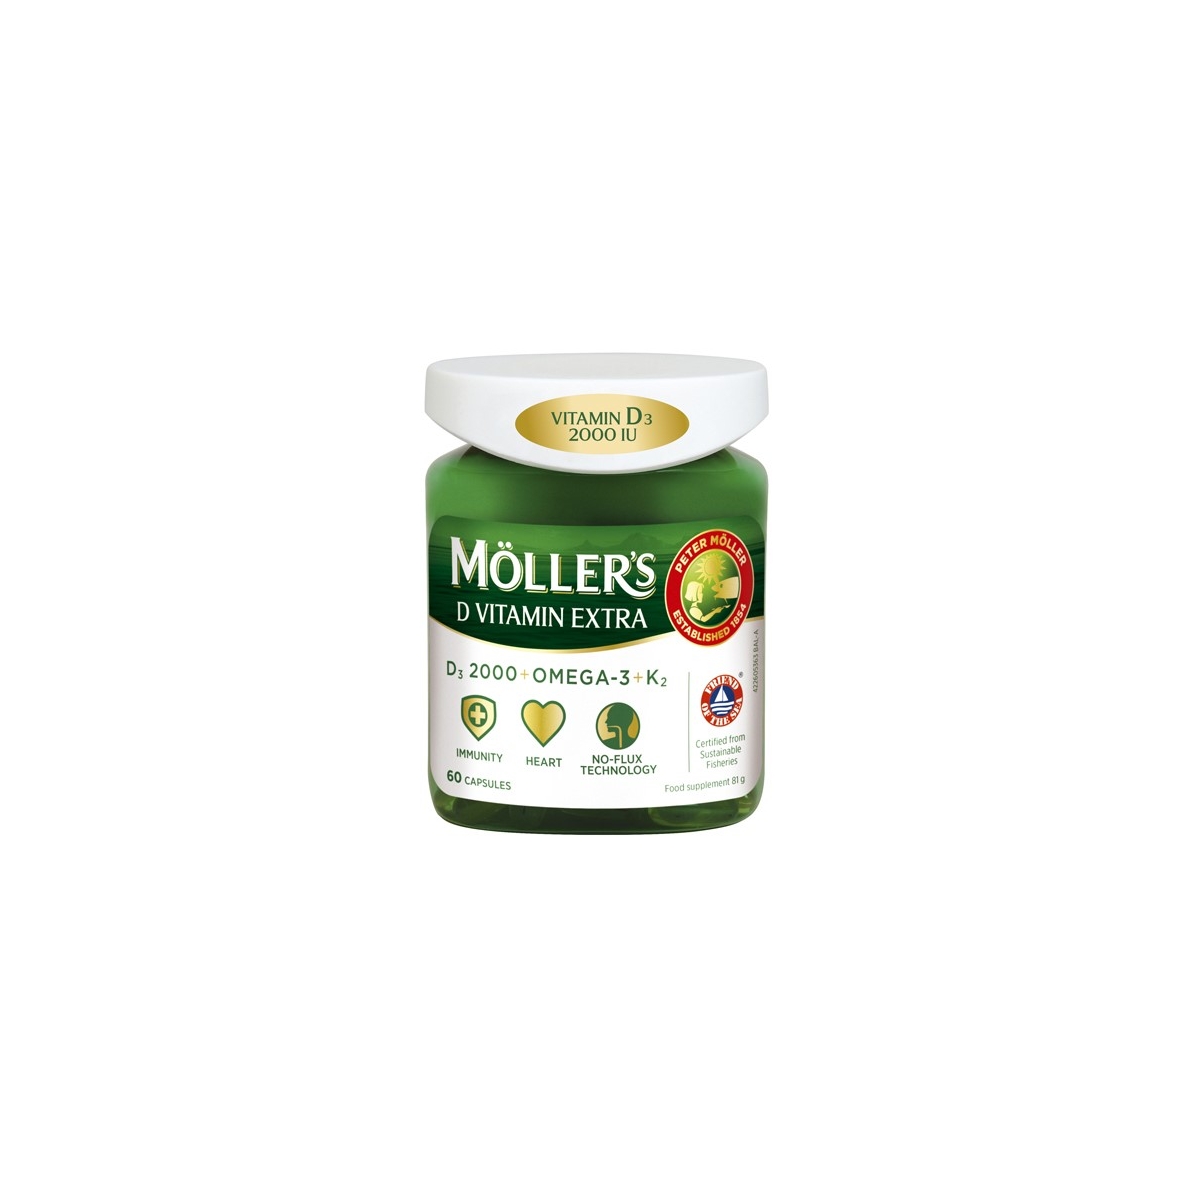 MOLLERS D VITAMIN EXTRA N60